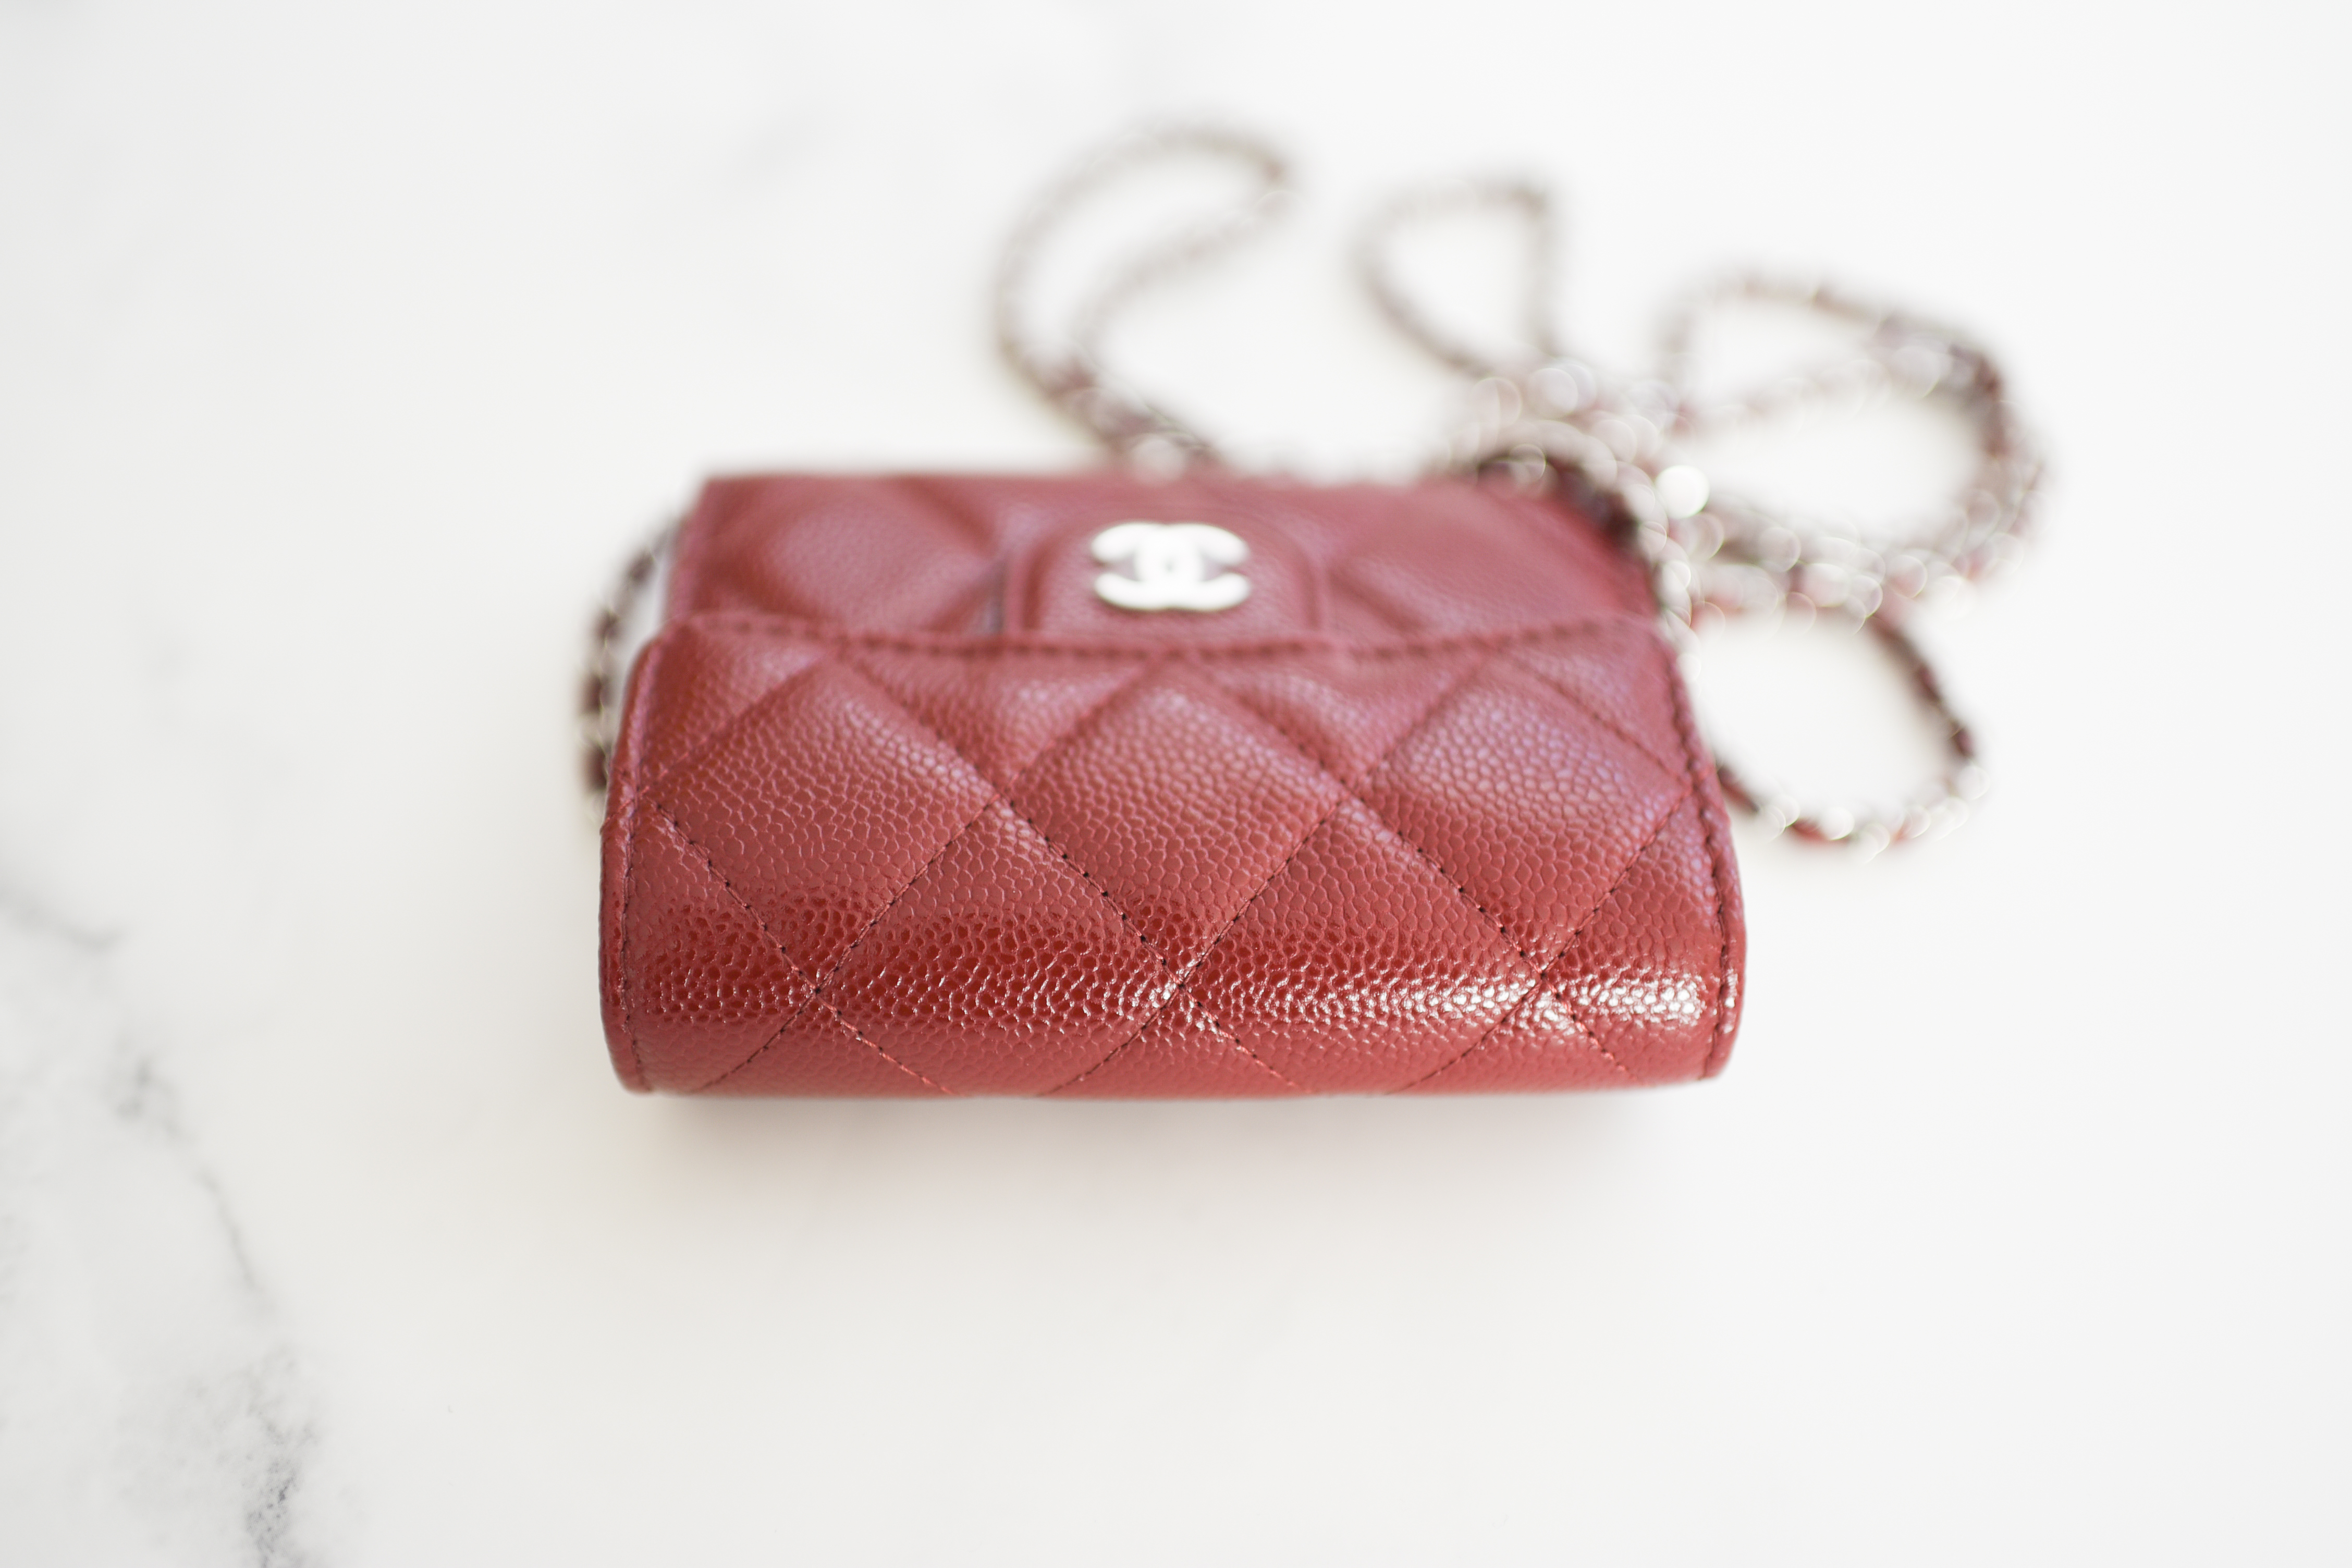 Chanel SLG Card Holder With Chain, Burgundy Caviar Leather, Gold Hardware,  New in Box